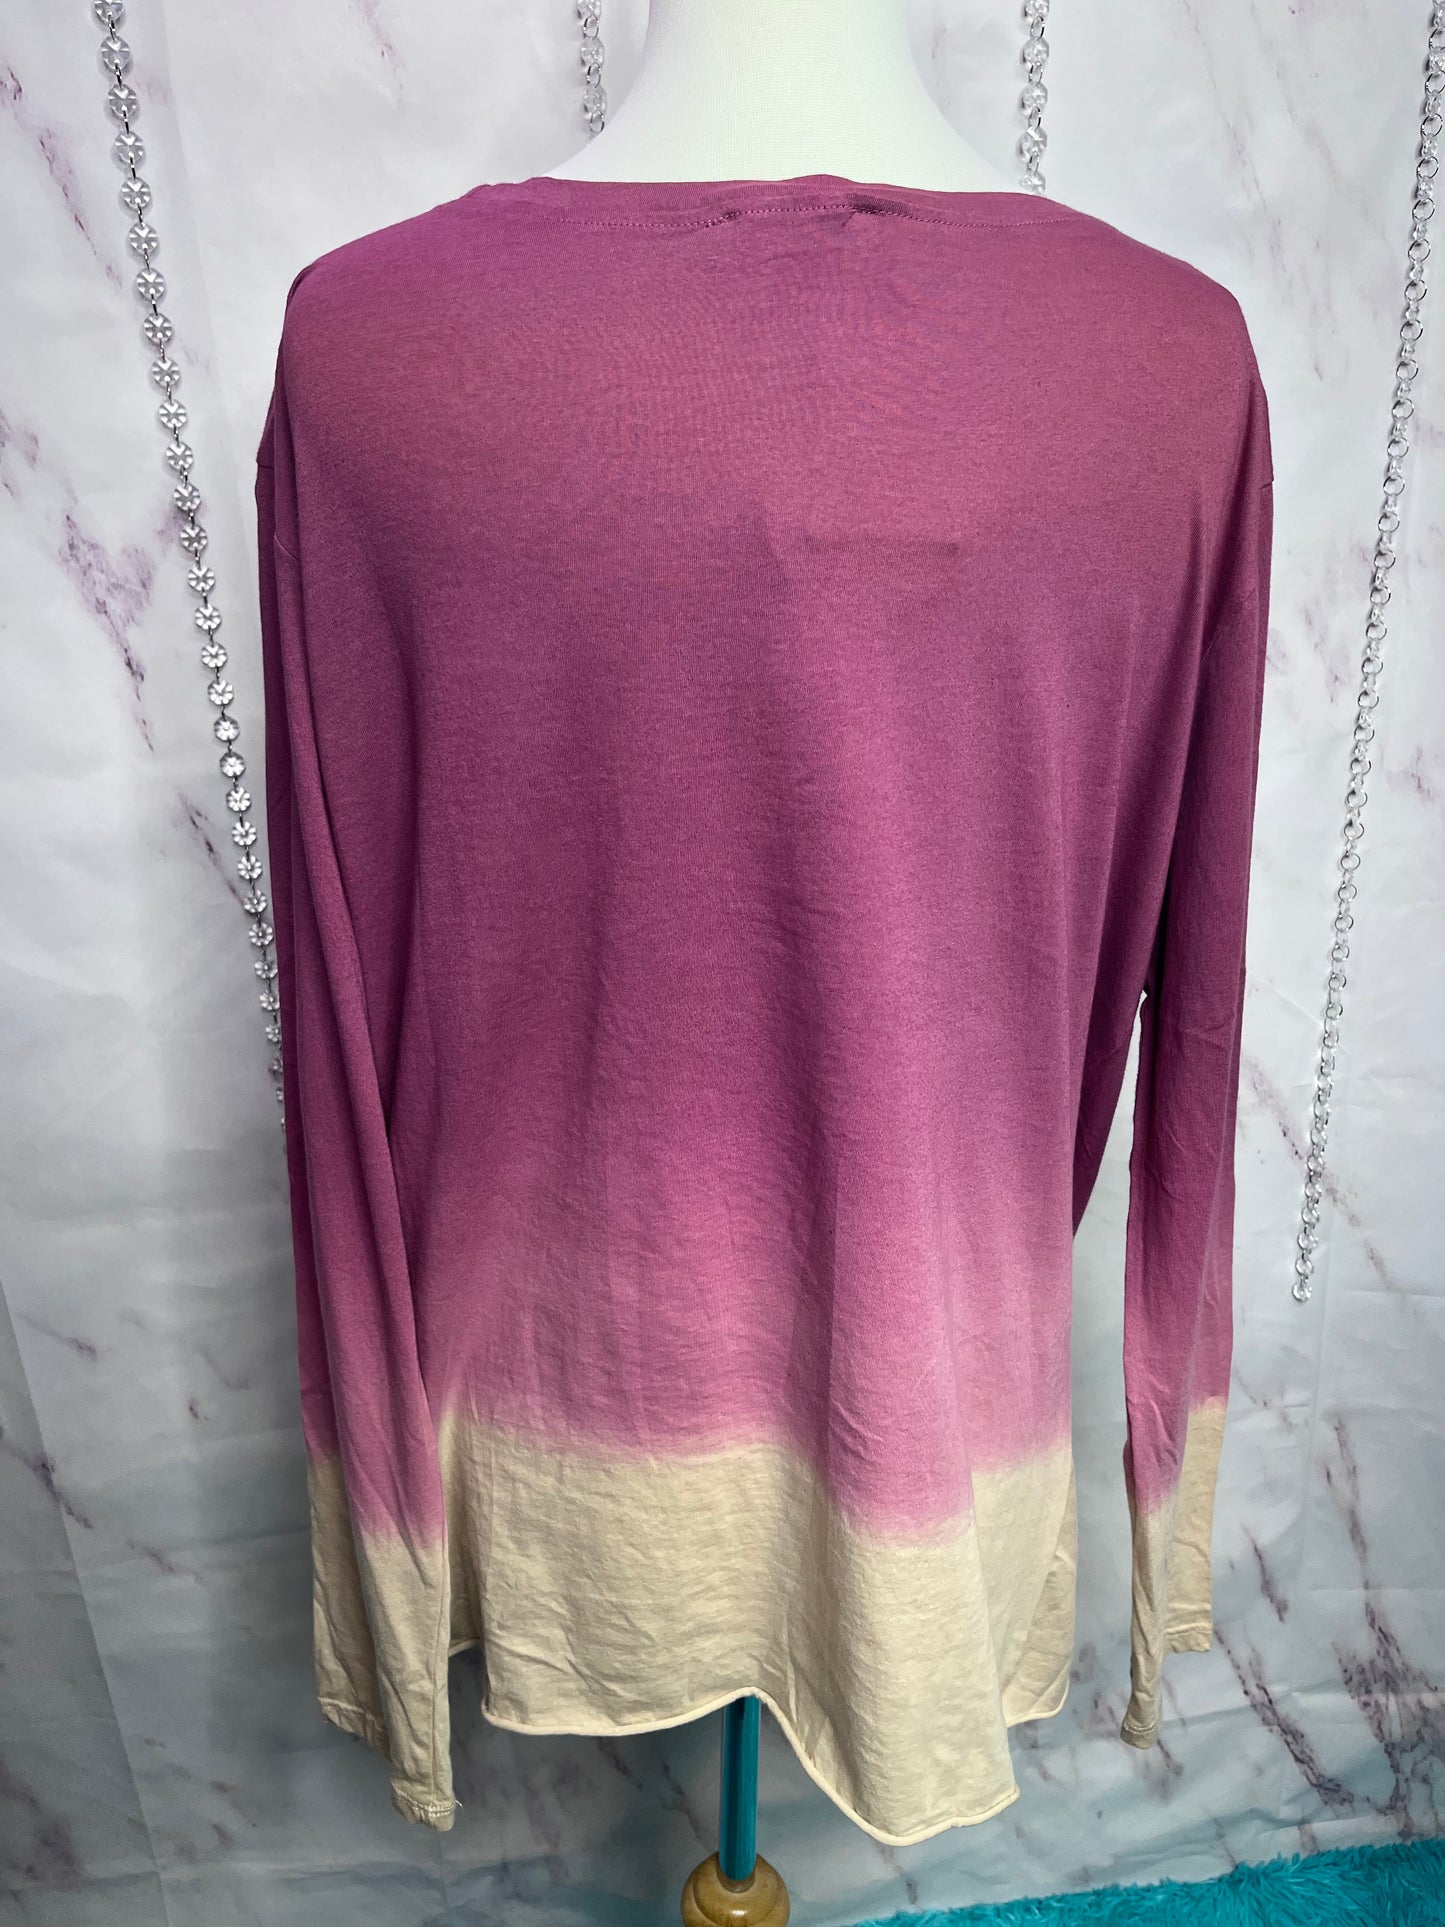 Wine Ombré Top with Twist Knot